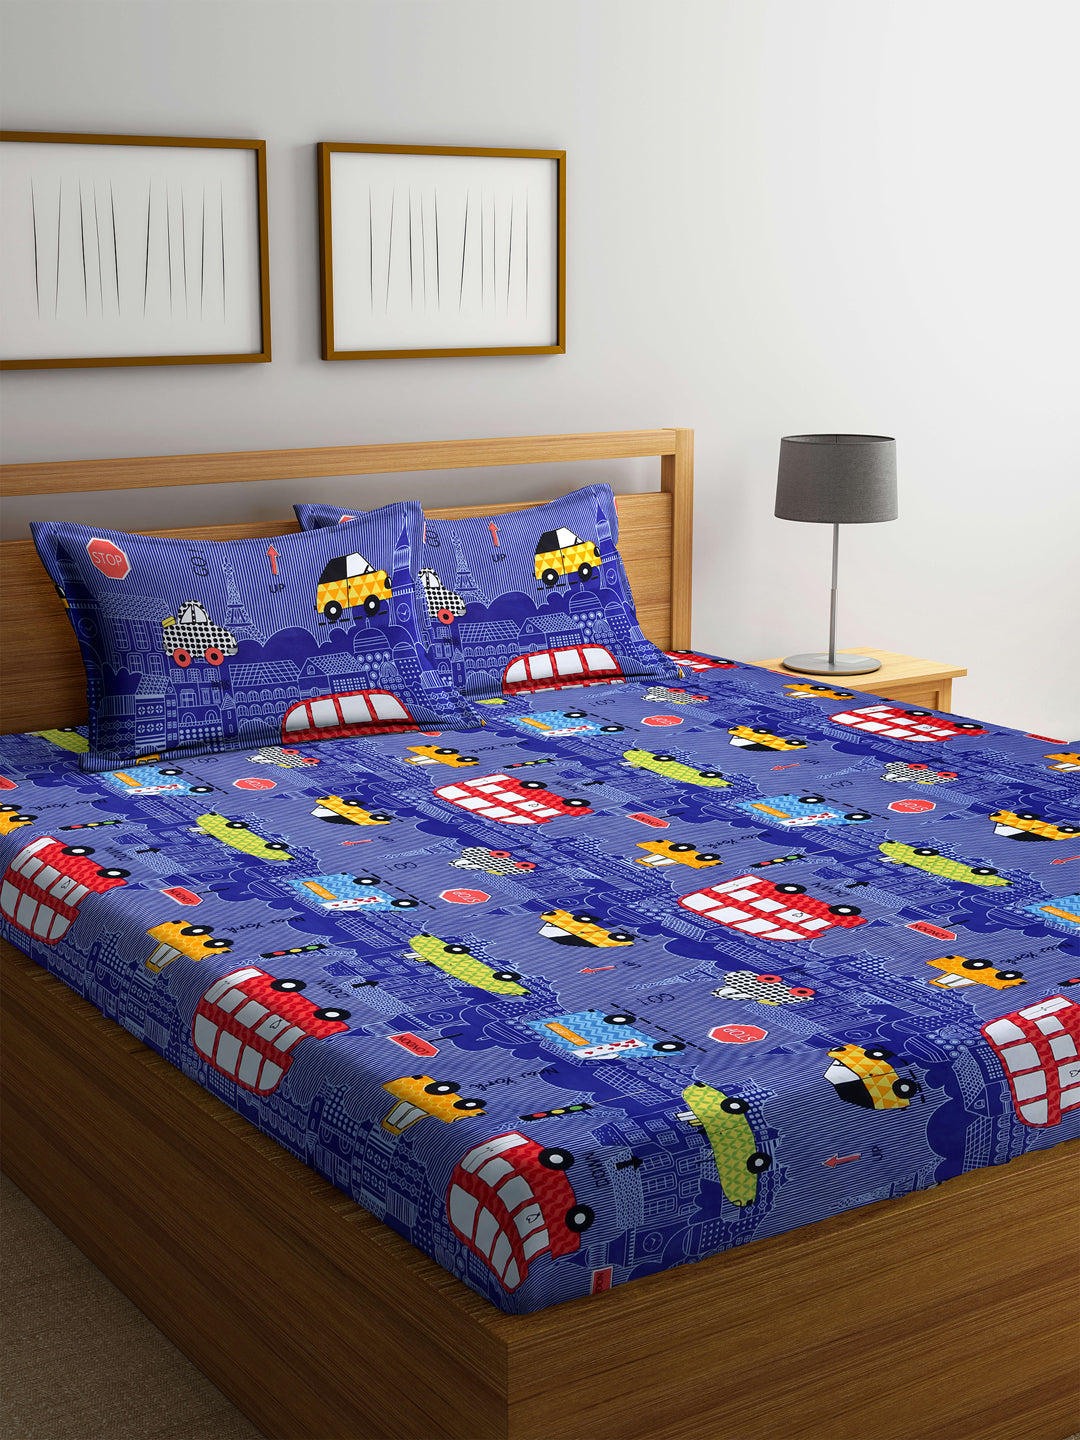 Special Kid's Edition Animal Bed Sheet Set with Two Pillow Covers by KLOTTHE®